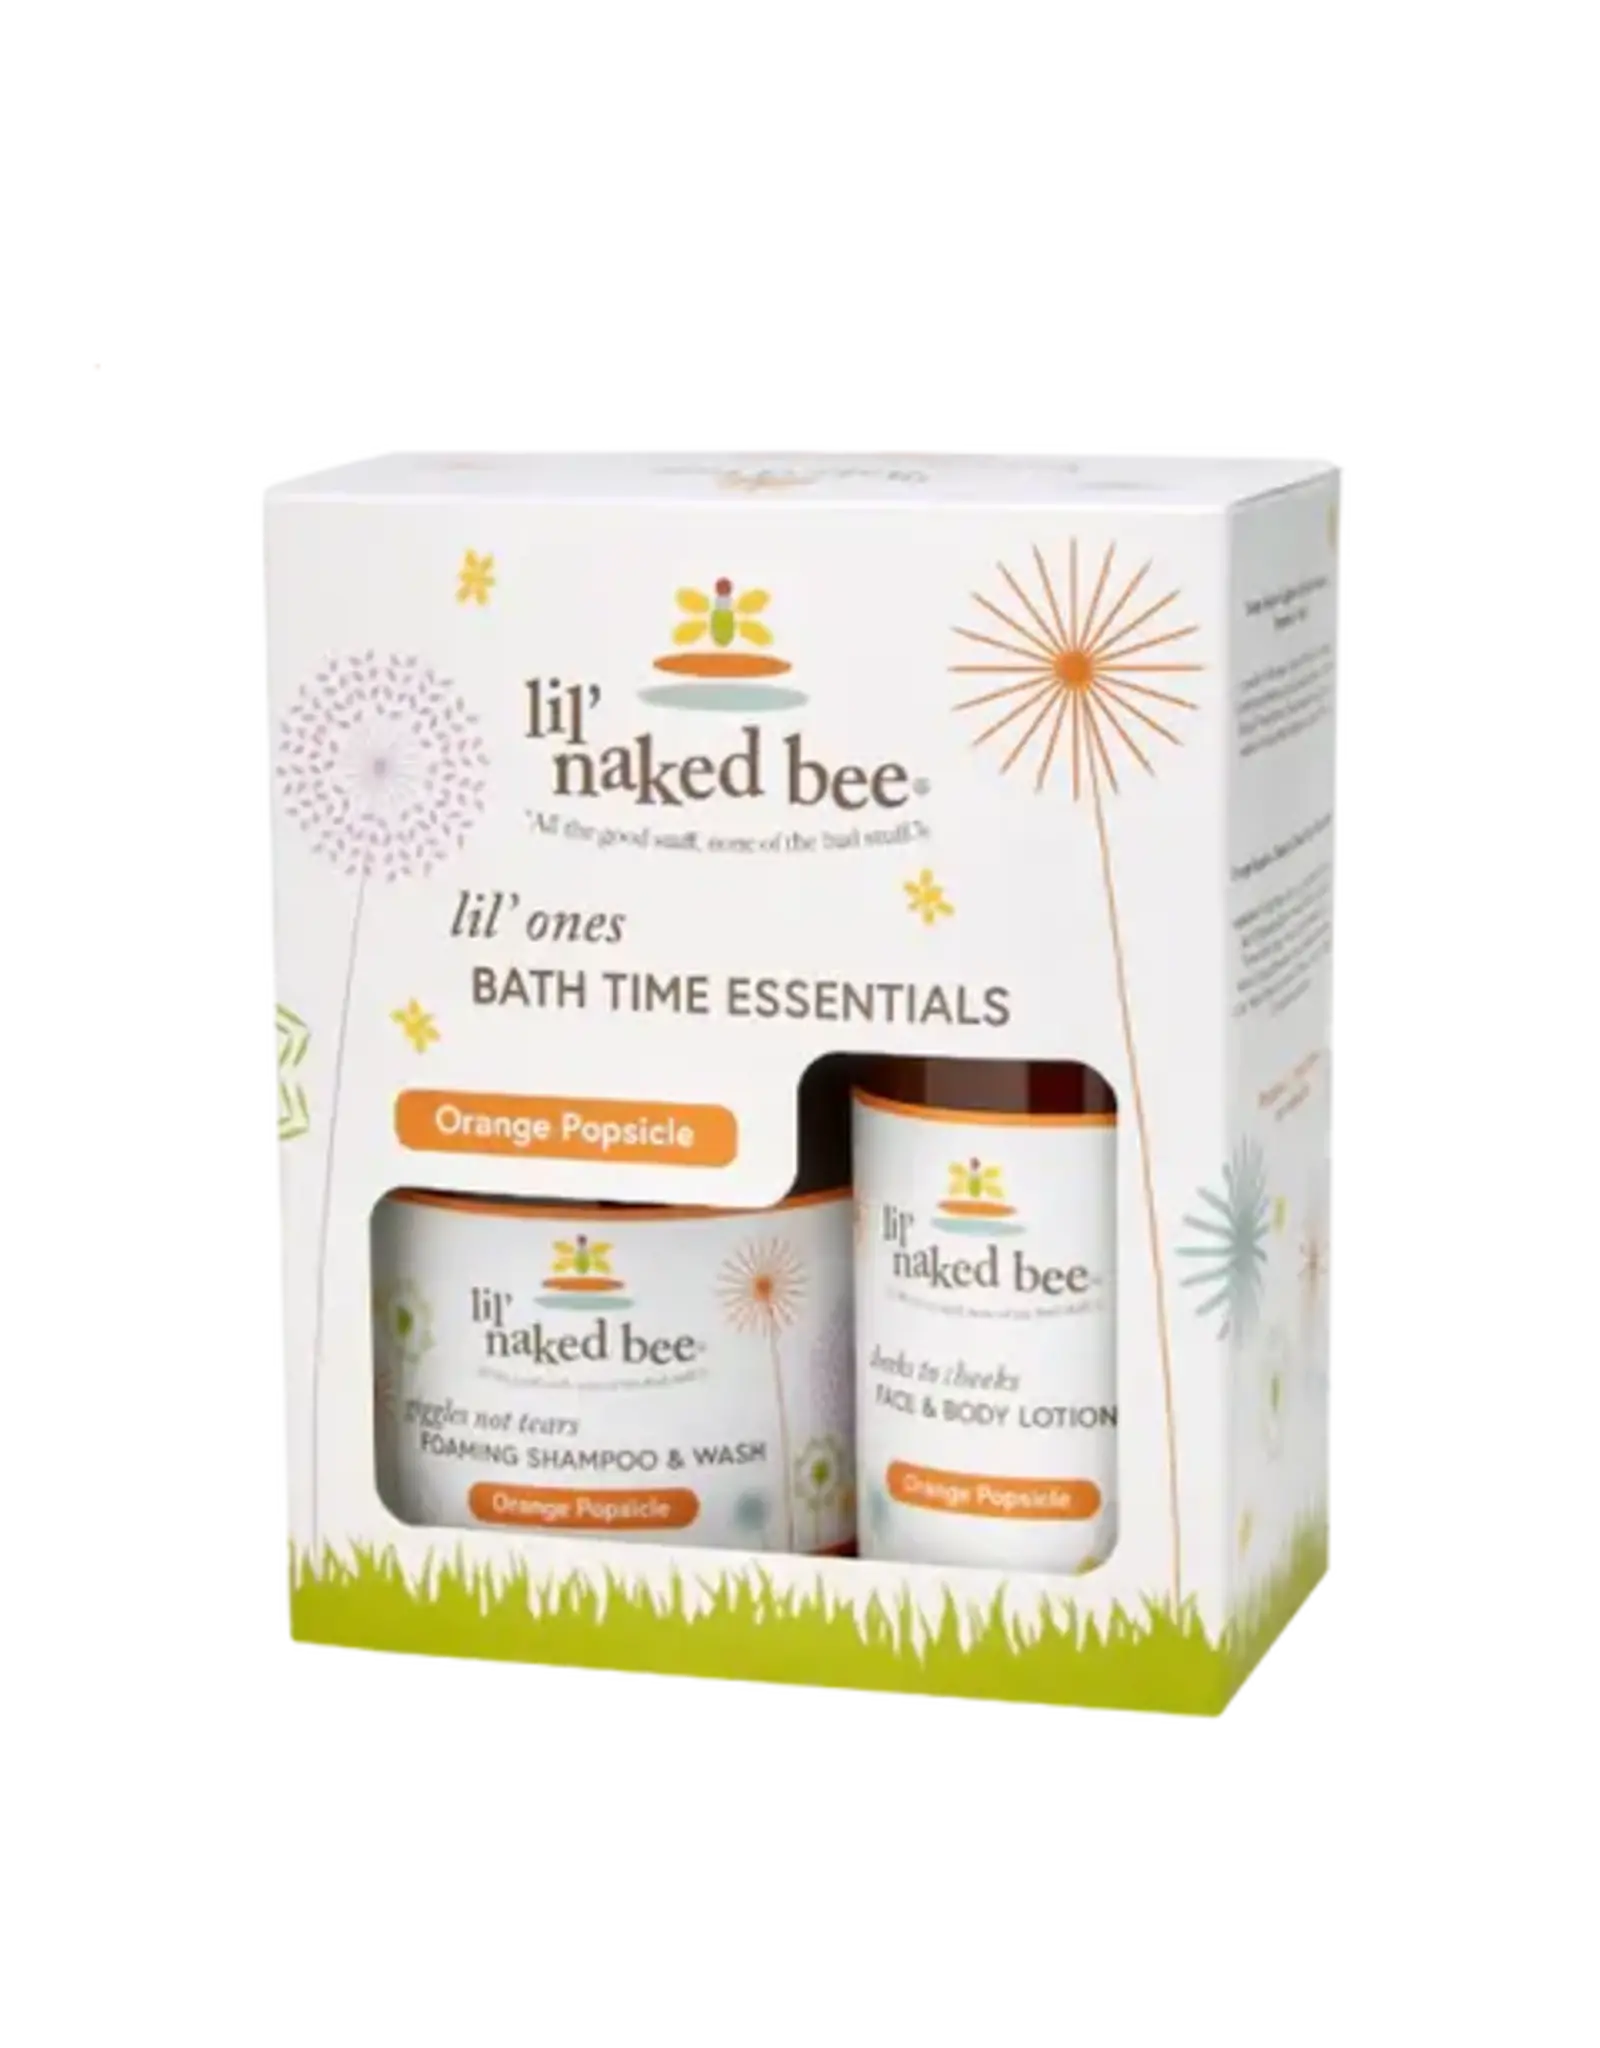 The Naked Bee Lil' Naked Bee - Lil' Ones Bath Time Gift Set